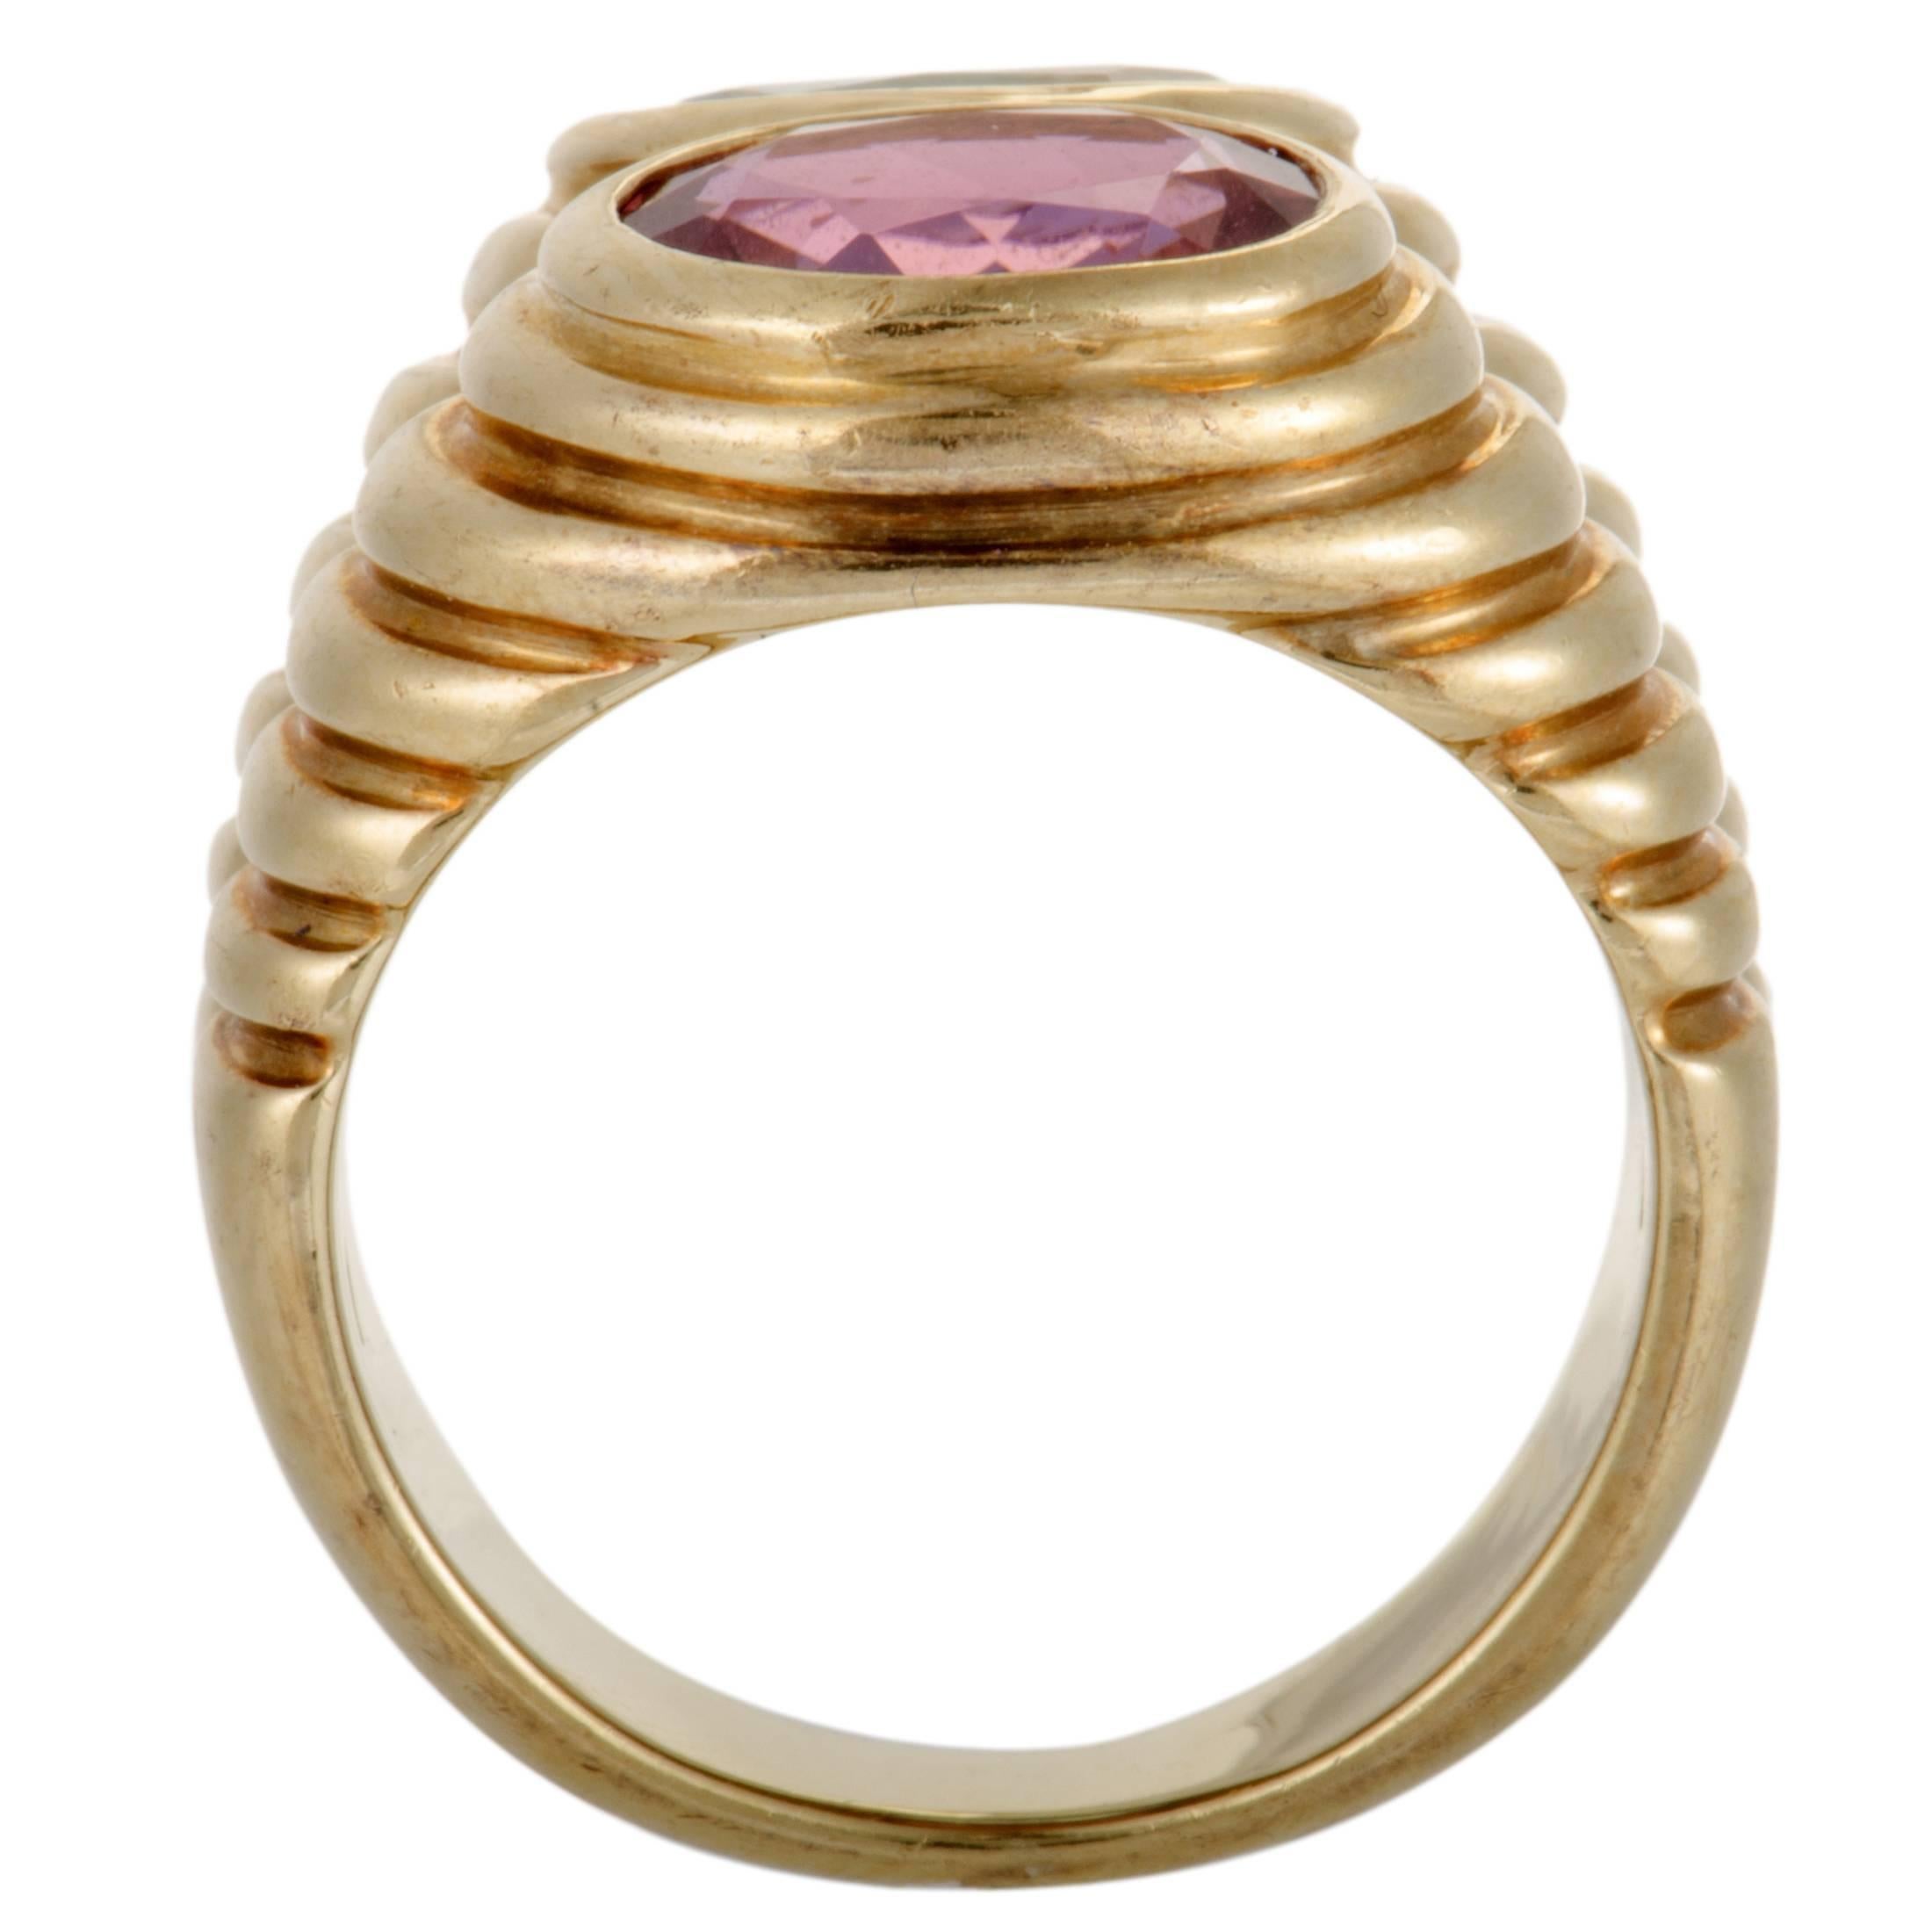 A stunningly unconventional design and an endearingly colorful décor give a gorgeous fashionable appeal to this sublime ring presented by Bvlgari. The ring is made of 18K yellow gold and embellished with topaz and pink tourmaline stones.
Ring Top